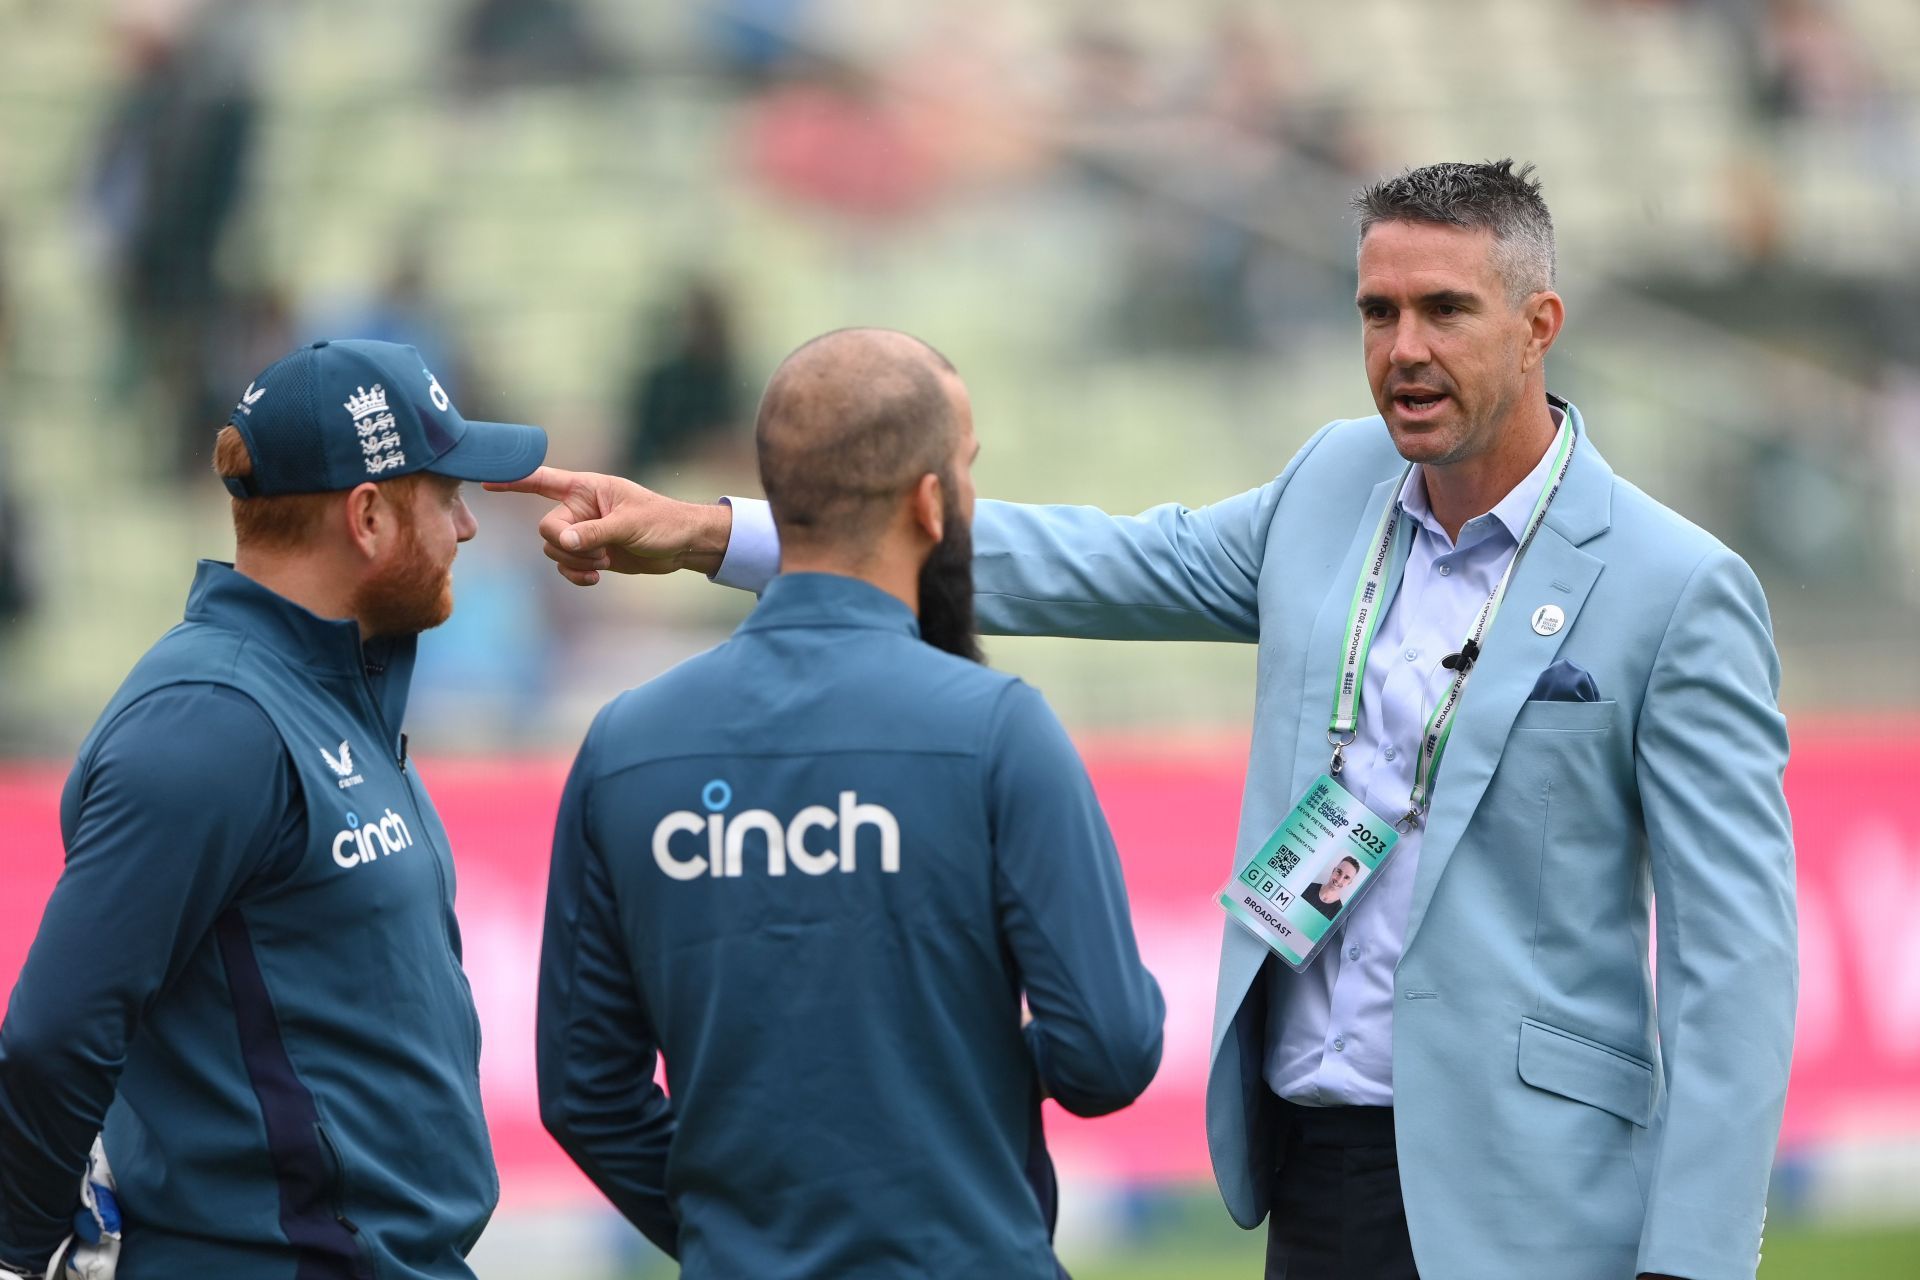 Kevin Pietersen (right) chats to Moeen Ali and Jonny Bairstow. Pic: Getty Images)